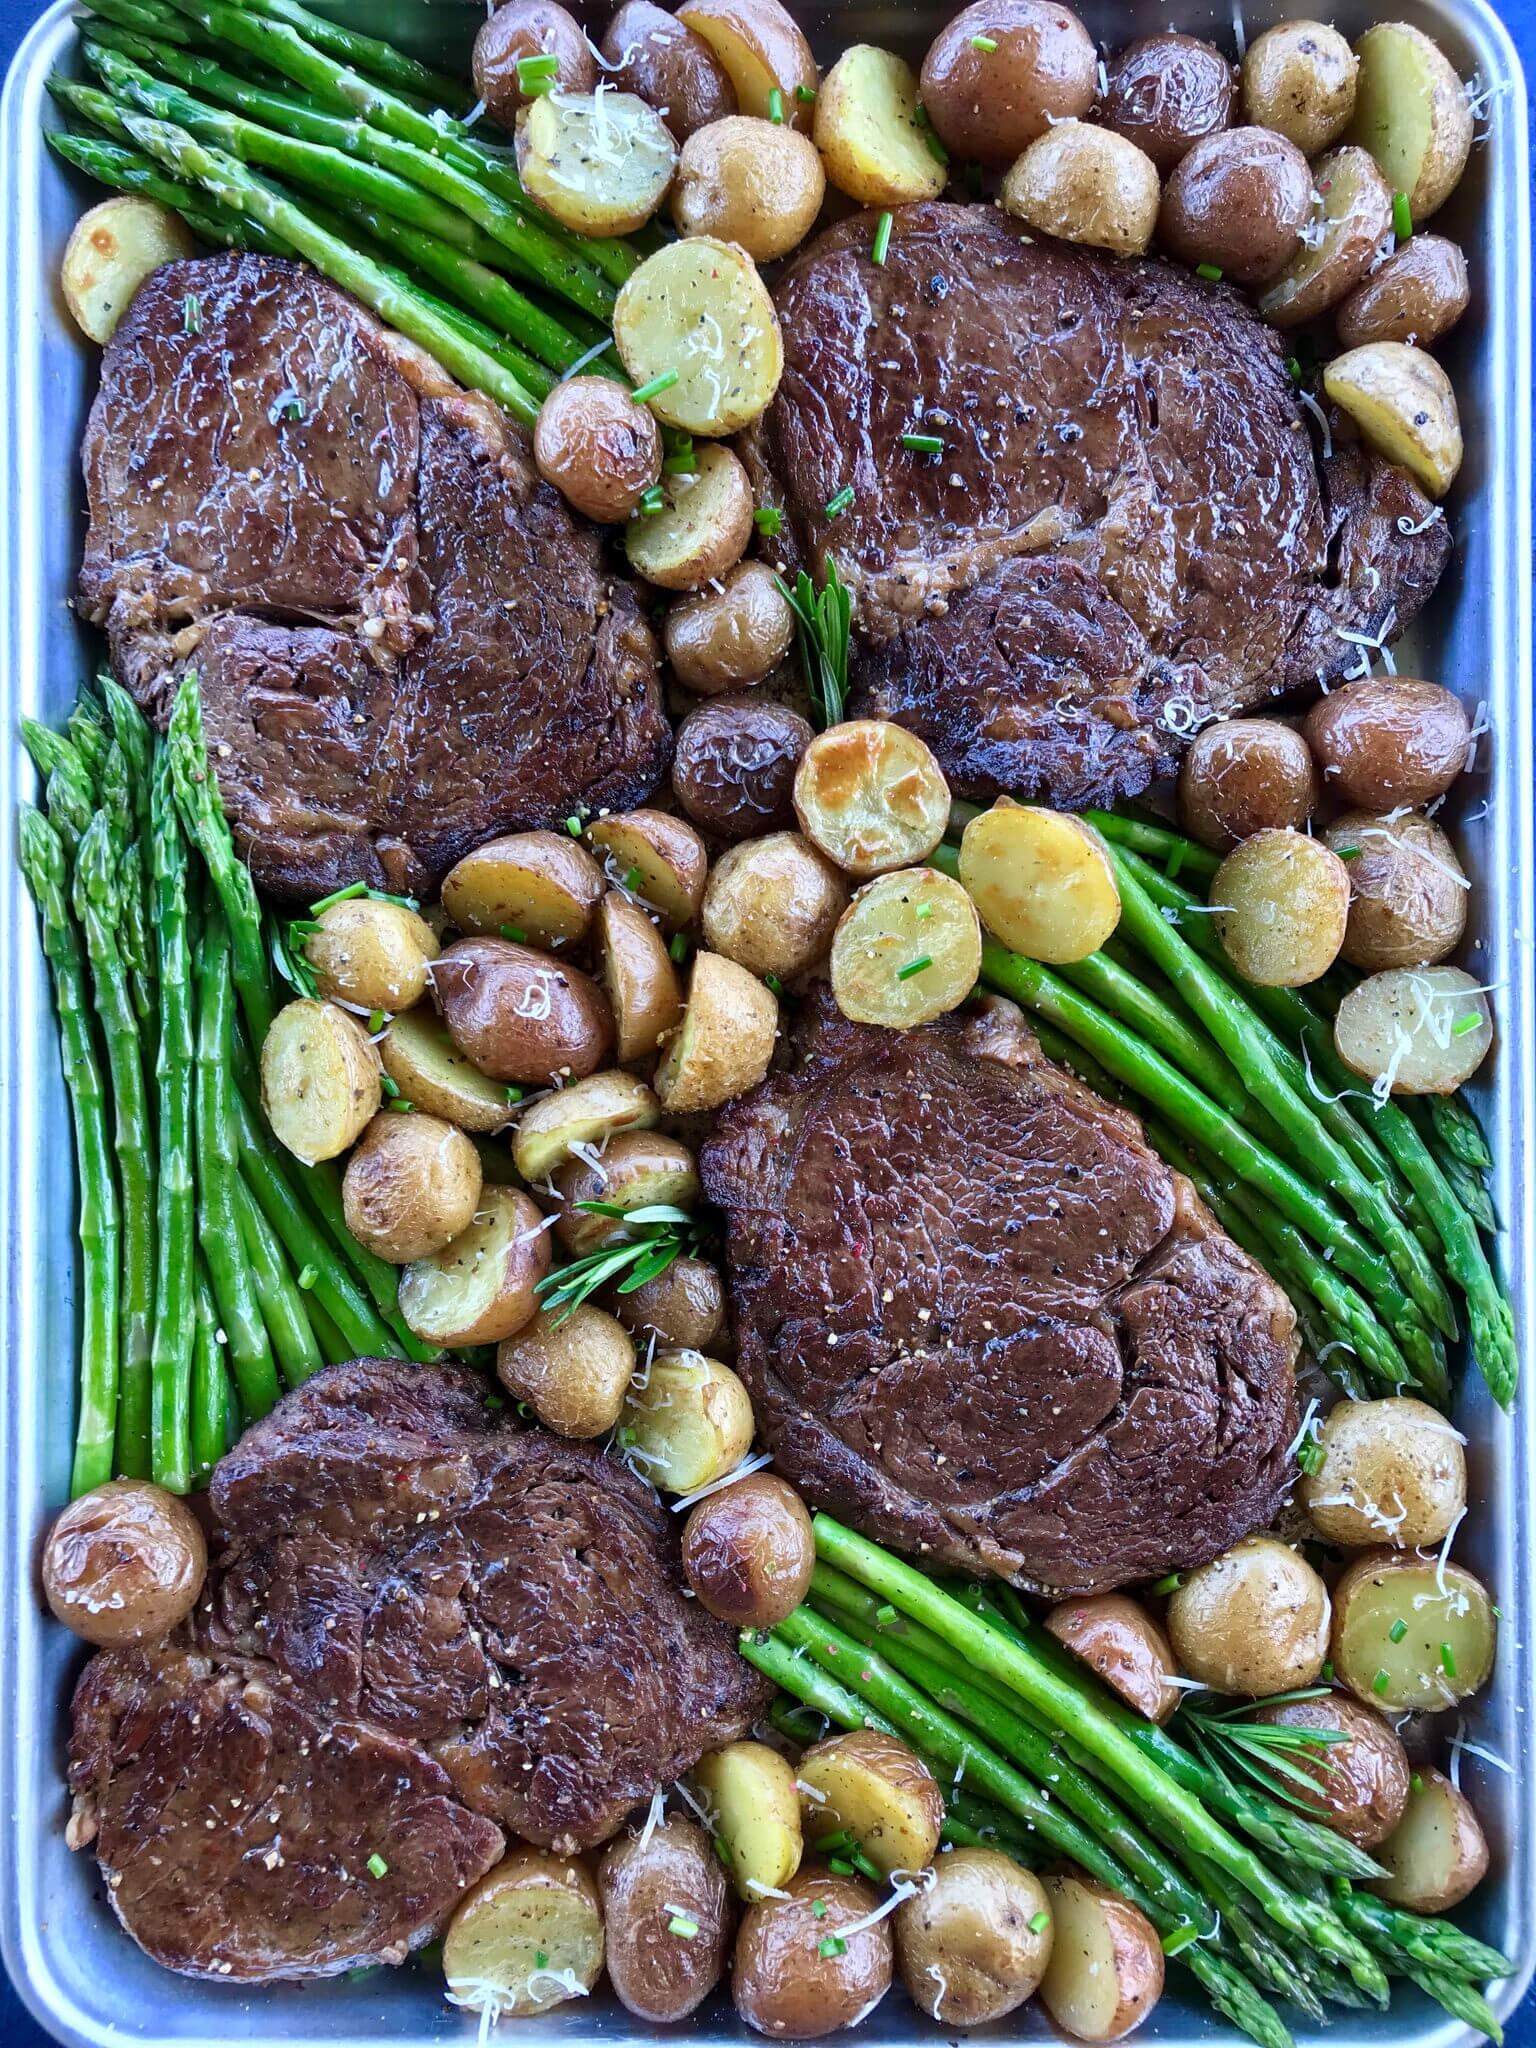 Steak and Potato with Asparagus